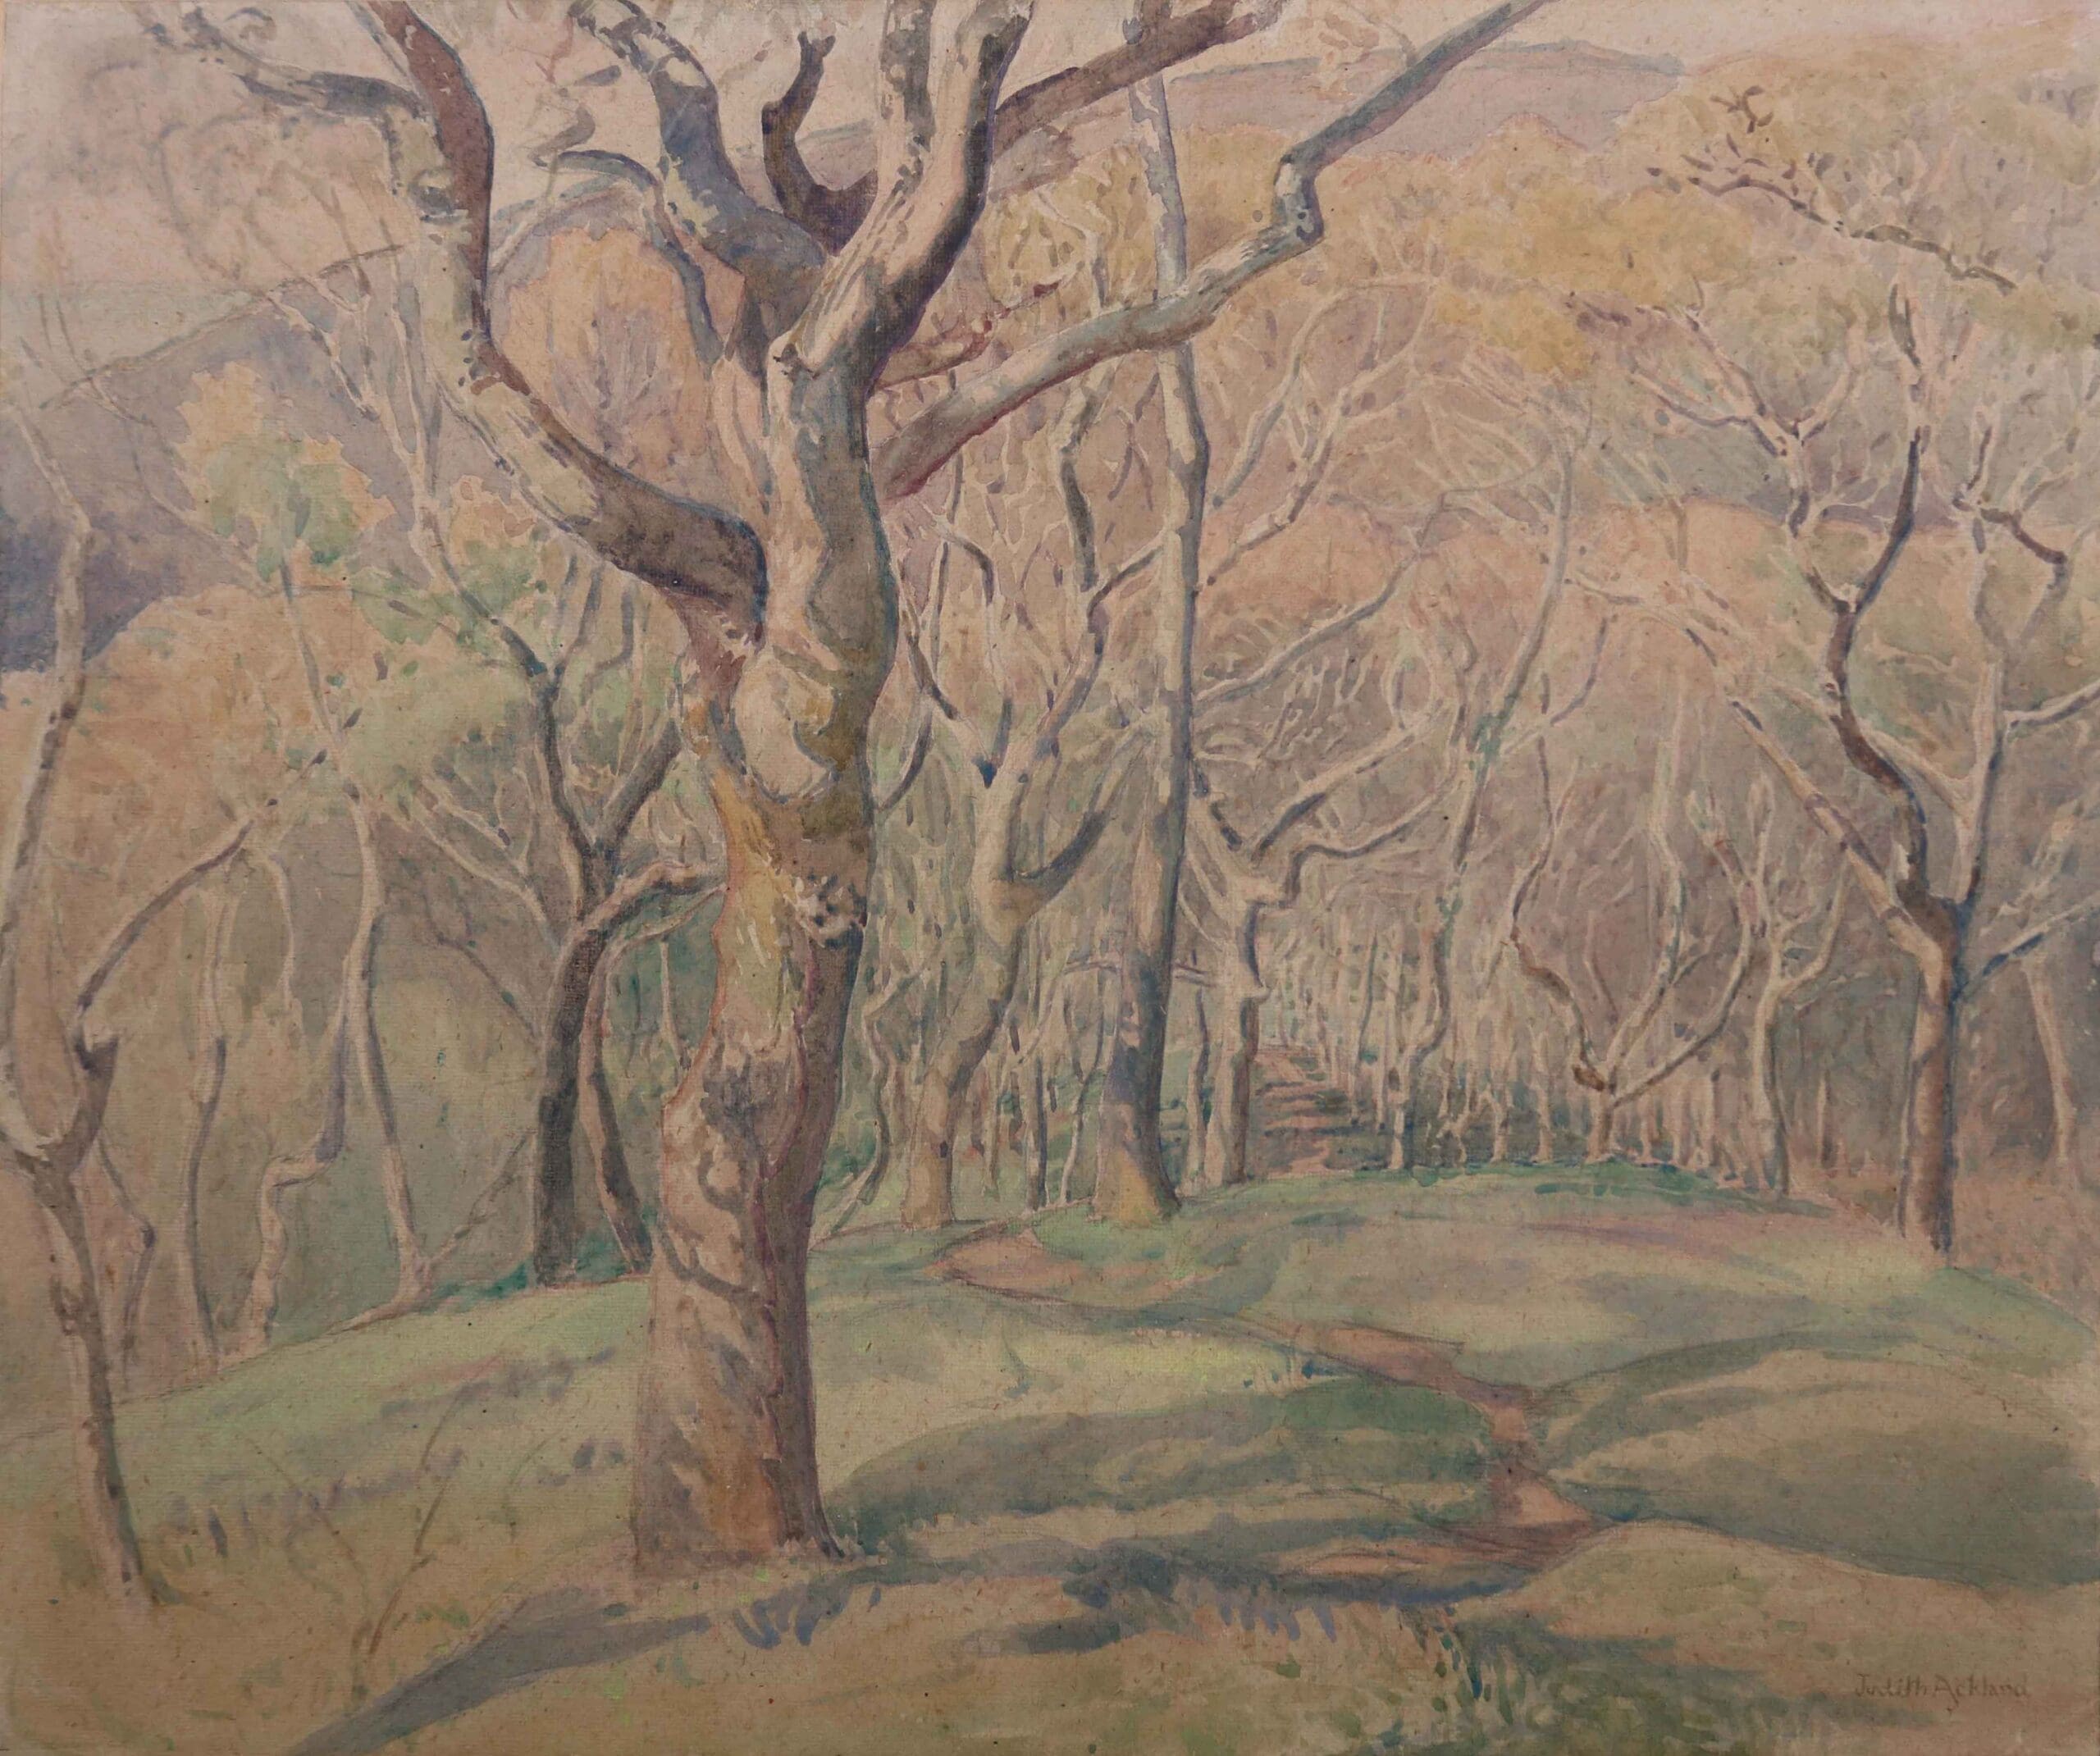 Judith Ackland's watercolour of woodland